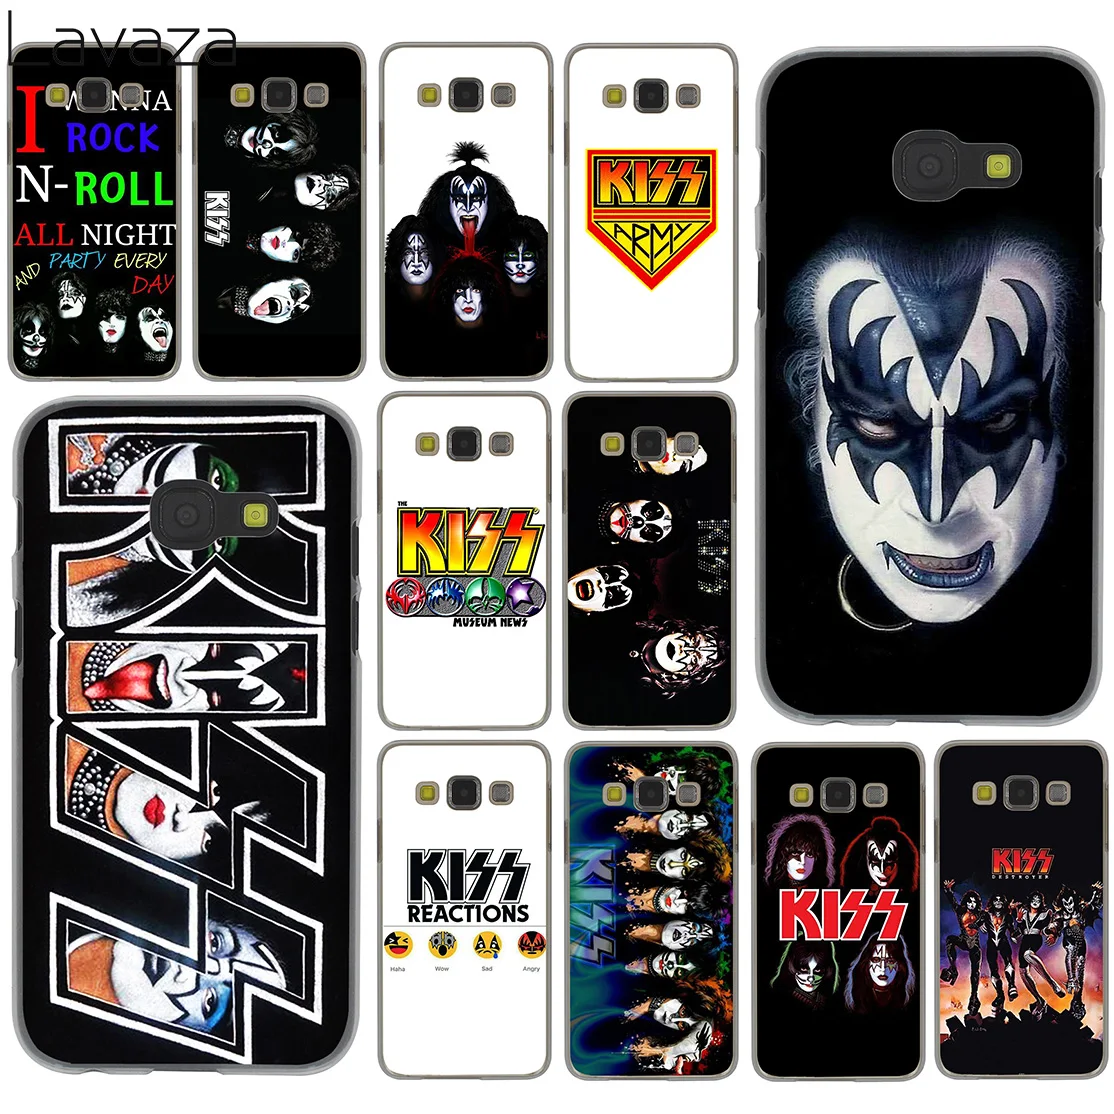 

Lavaza Gene Simmons Kiss band Hard Case for Samsung Galaxy A6 A8 Plus A7 A9 2018 A3 A5 2017 2016 2015 Note 9 8 Cover